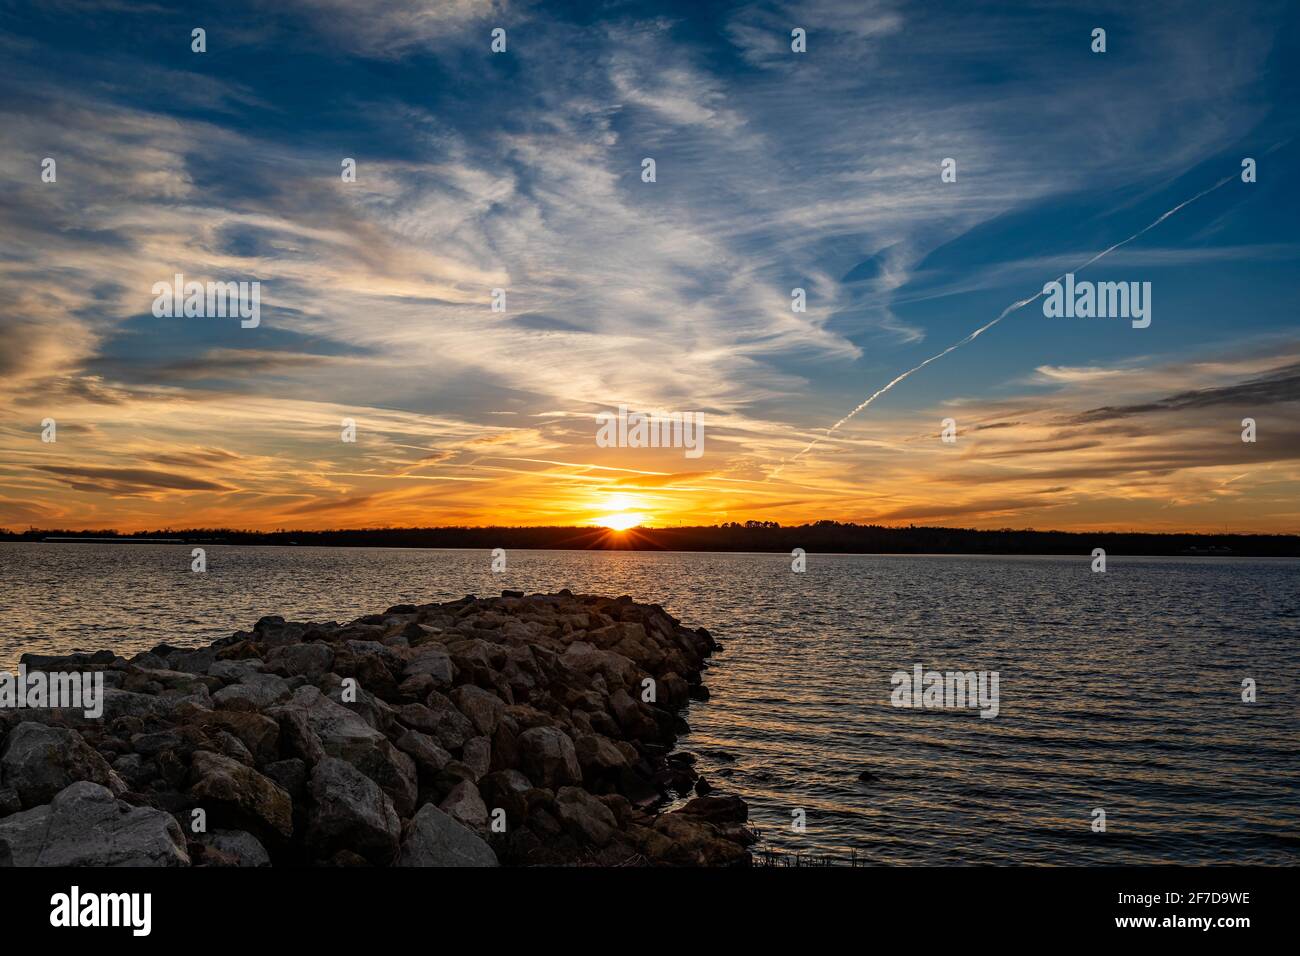 Sunset at a lake in Oklahoma. Stock Photo